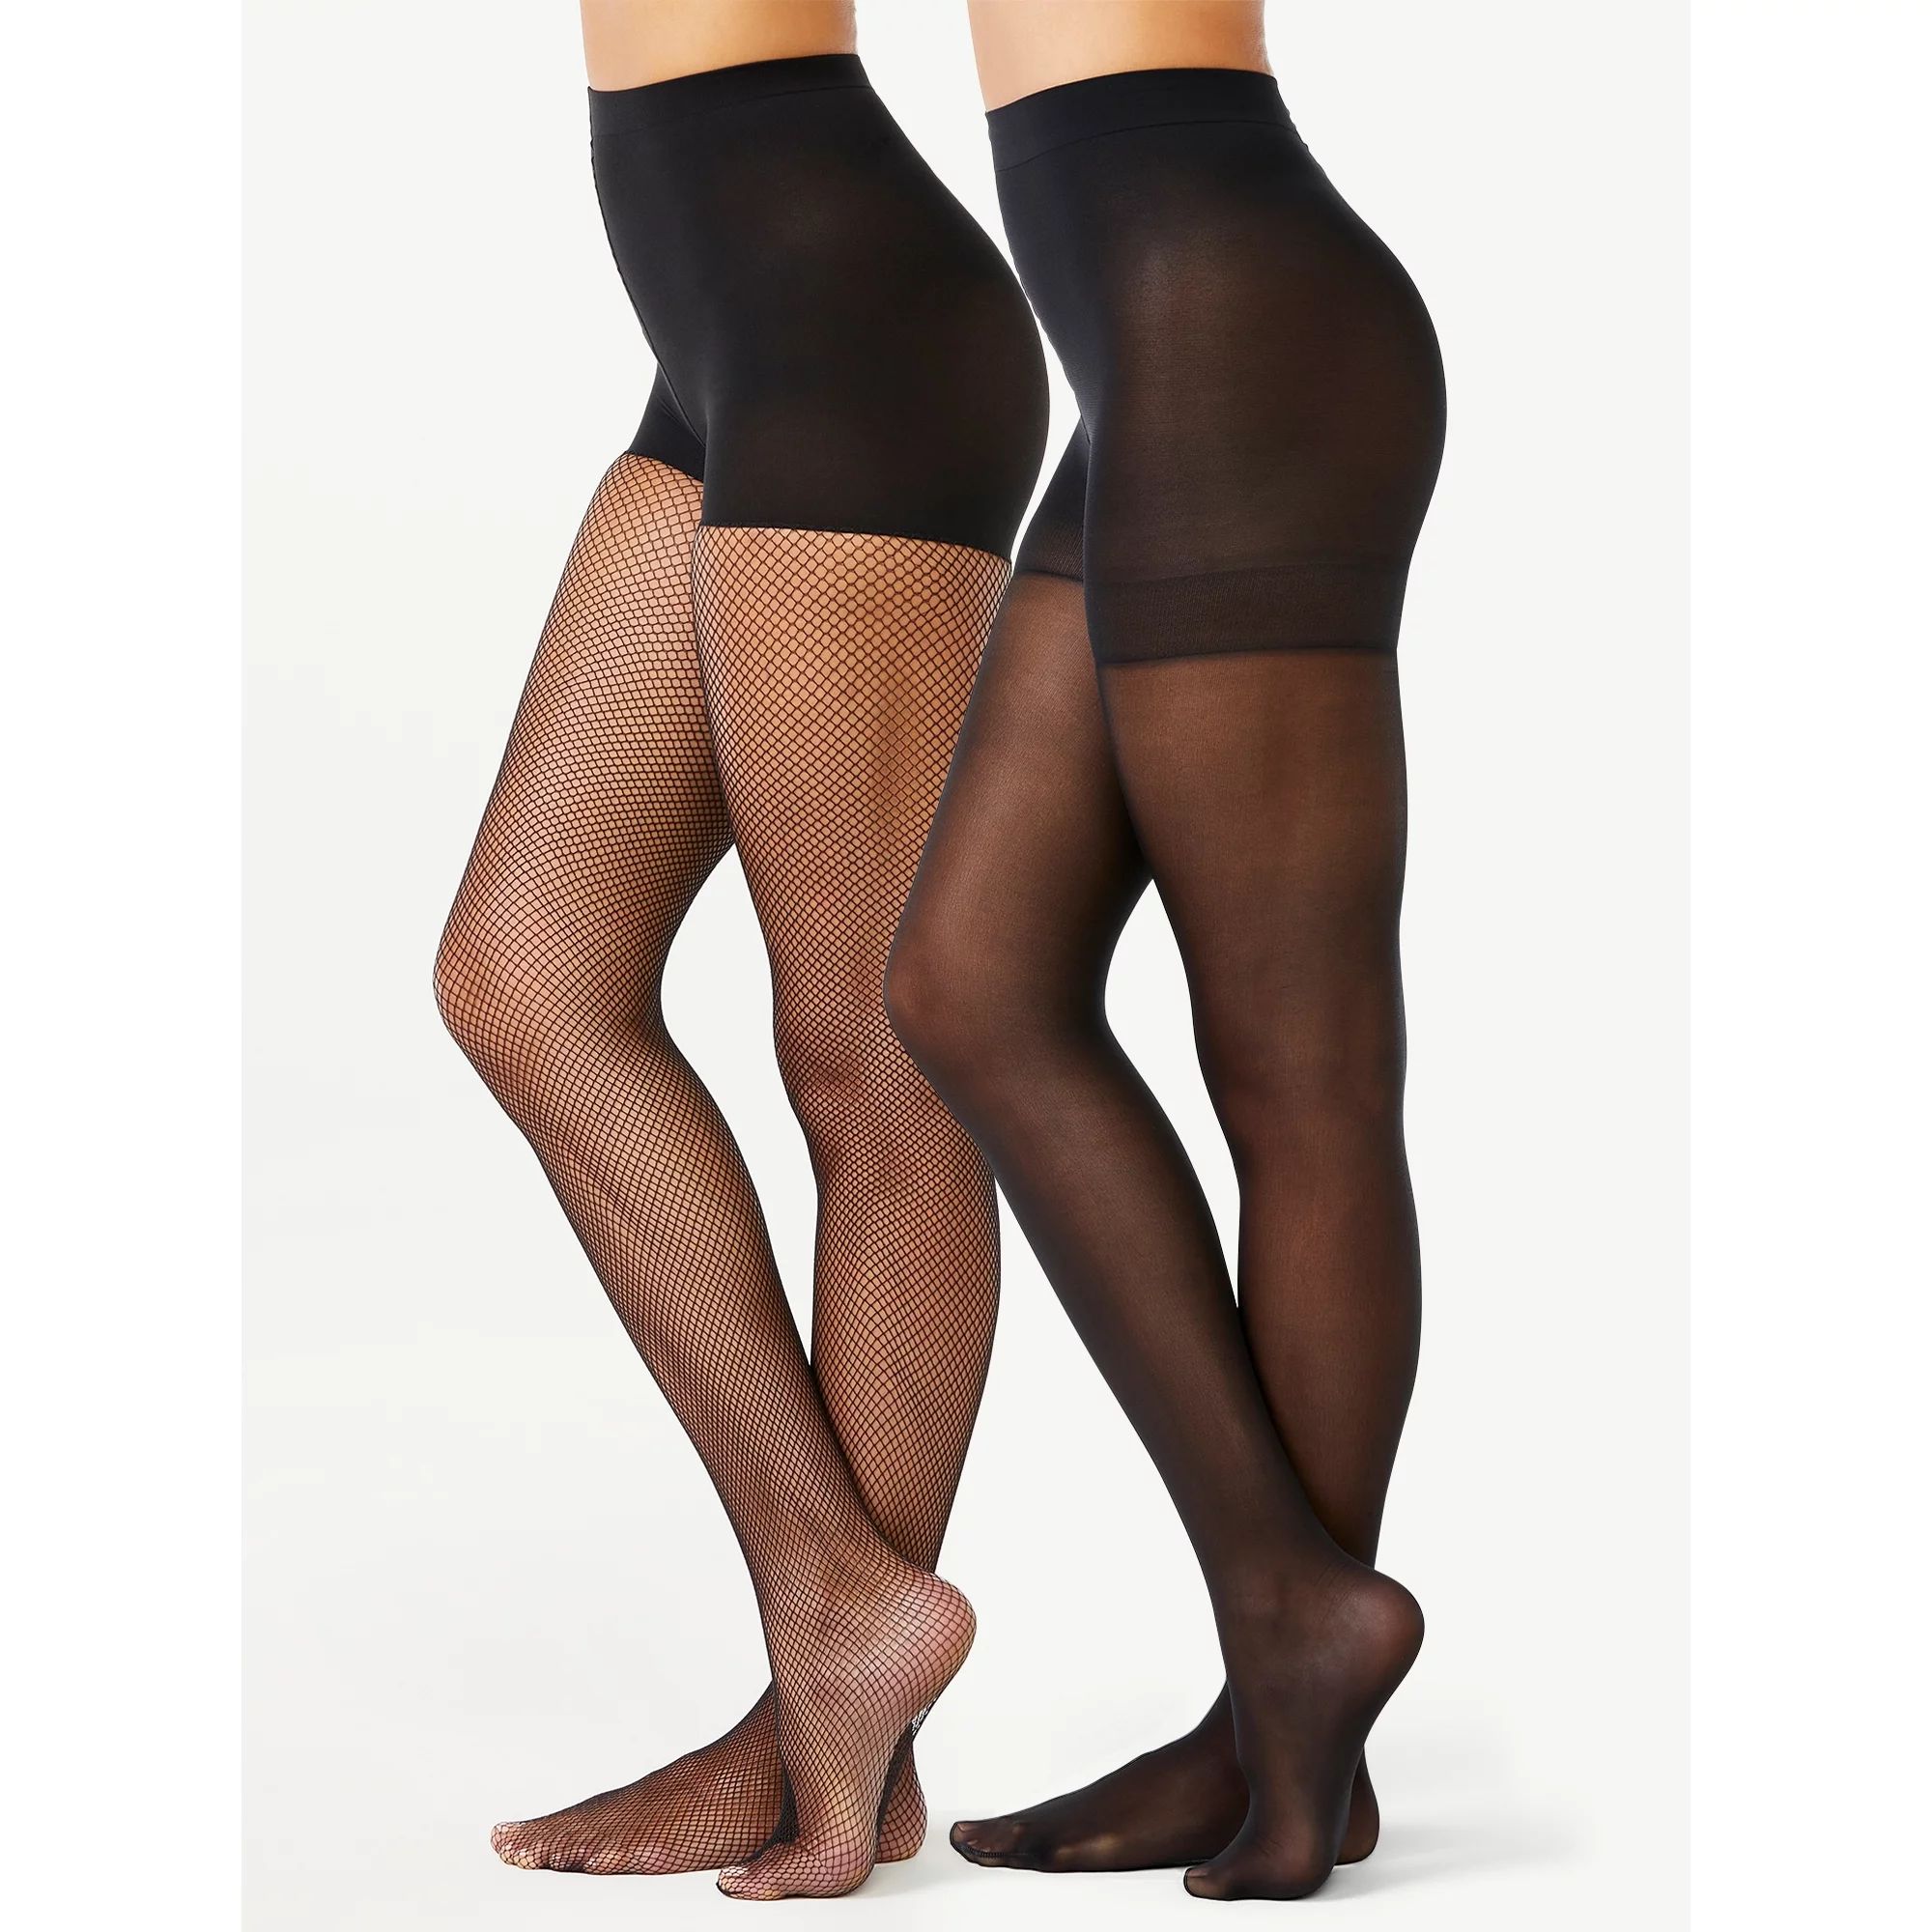 Joyspun Women's Fishnet and Solid Tights, 2-Pack, Sizes S to 2XL | Walmart (US)